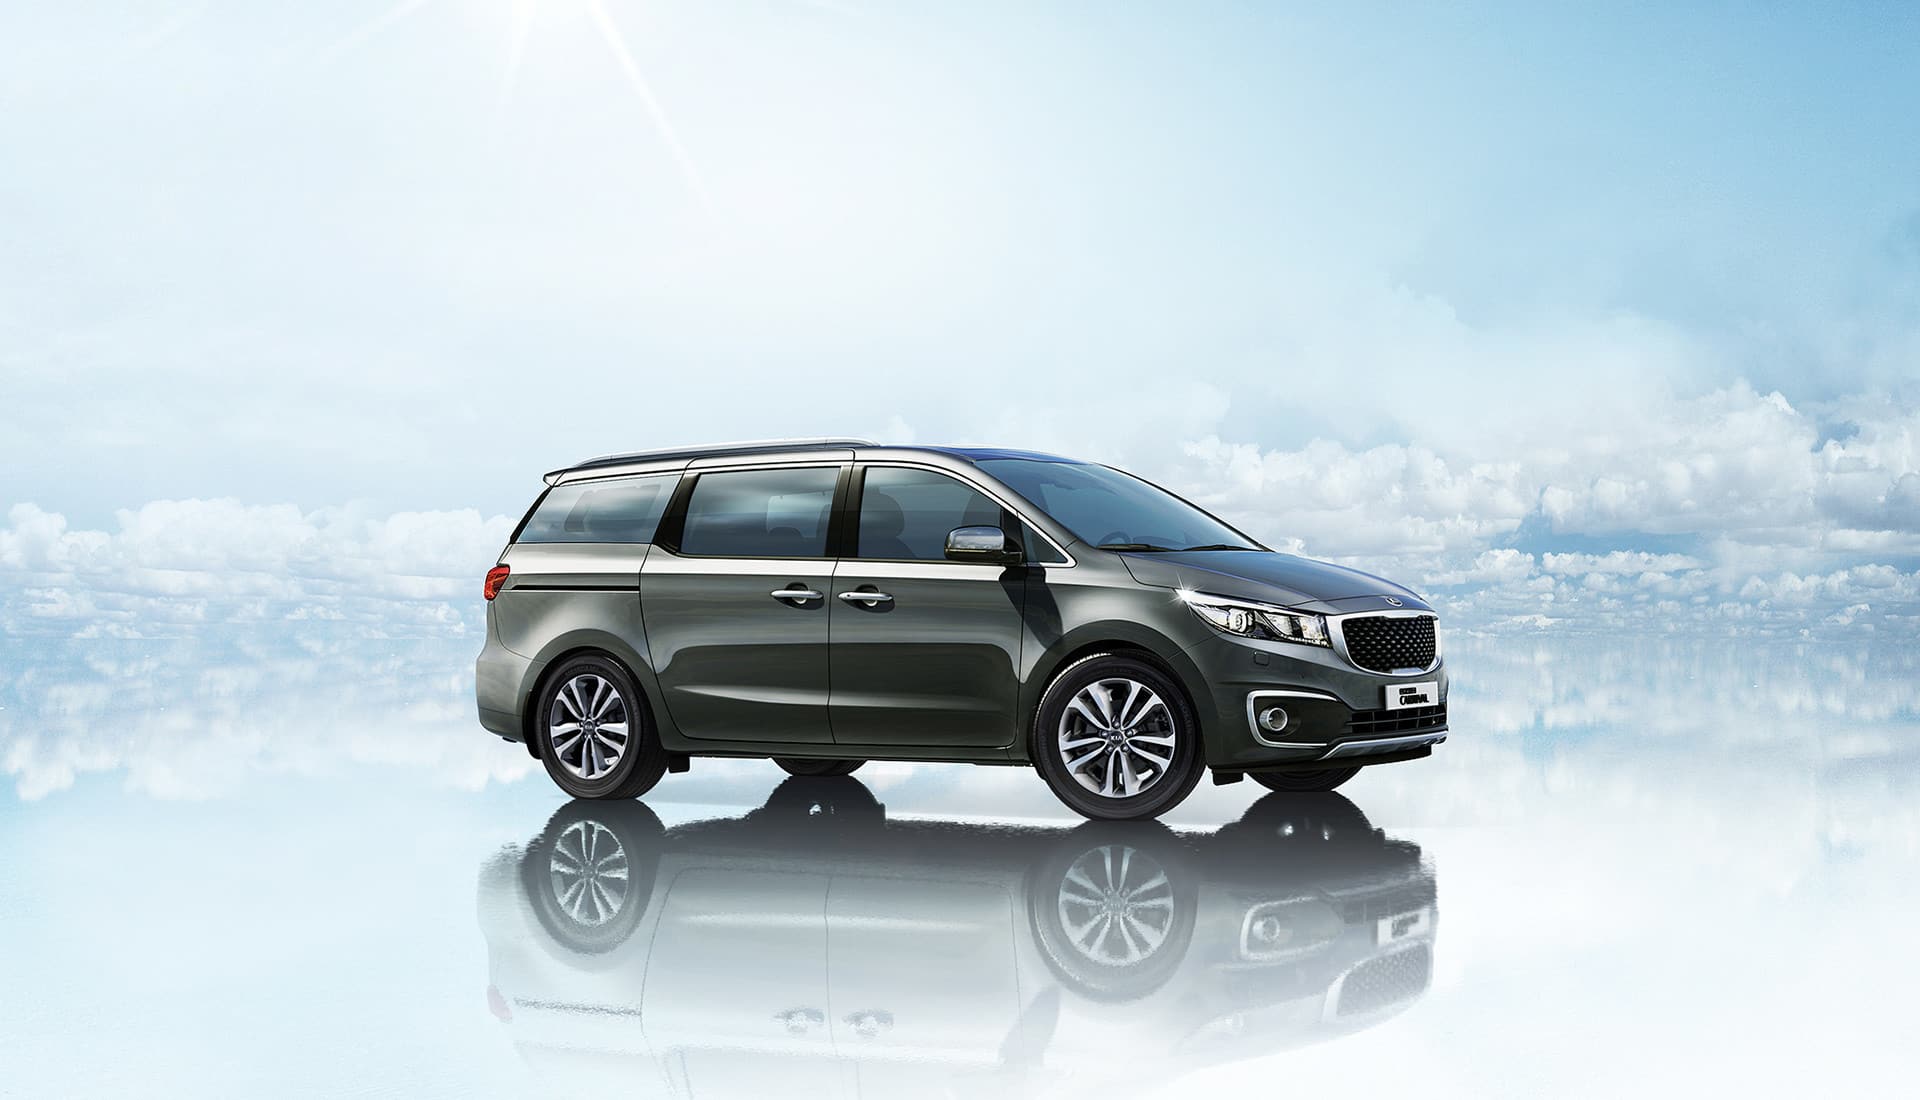 KIA offers a full house of features for an enhanced driving experience with the Kia Grand Carnival